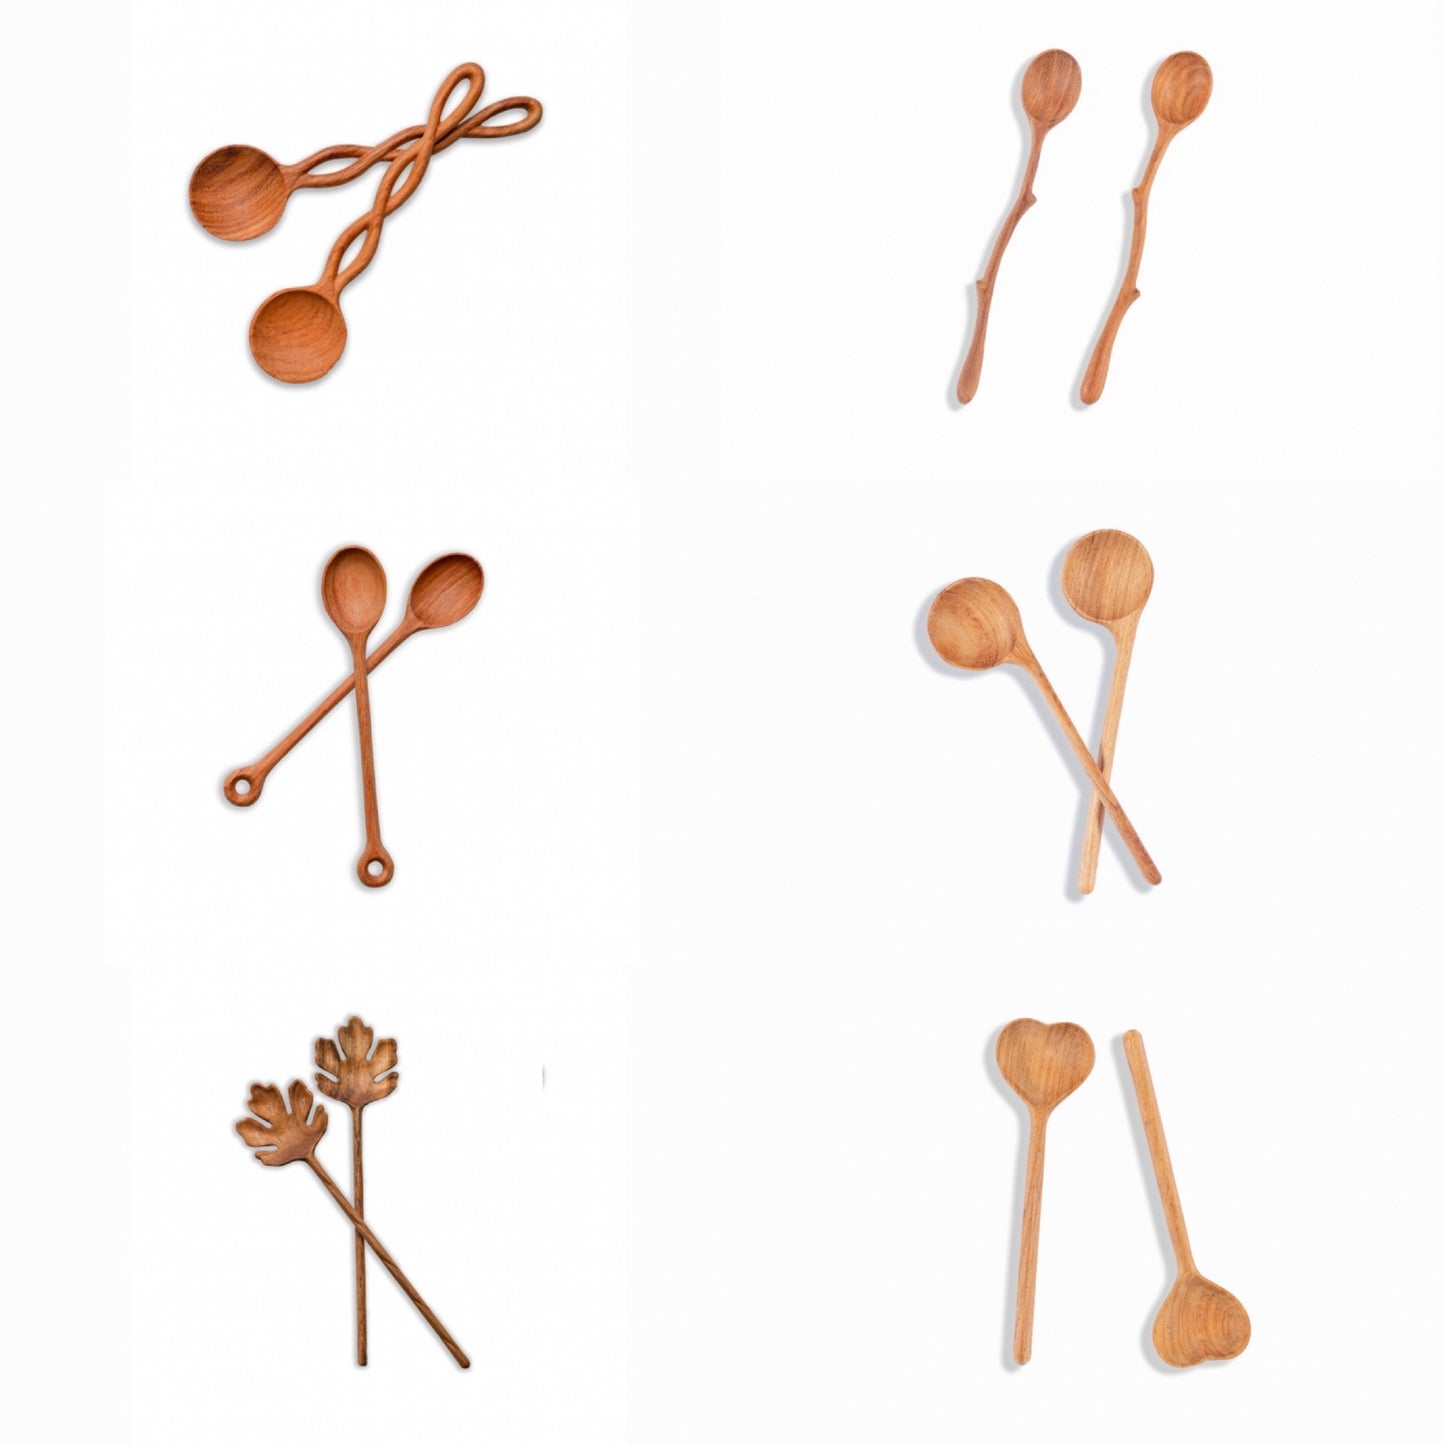 Carved wooden spoons